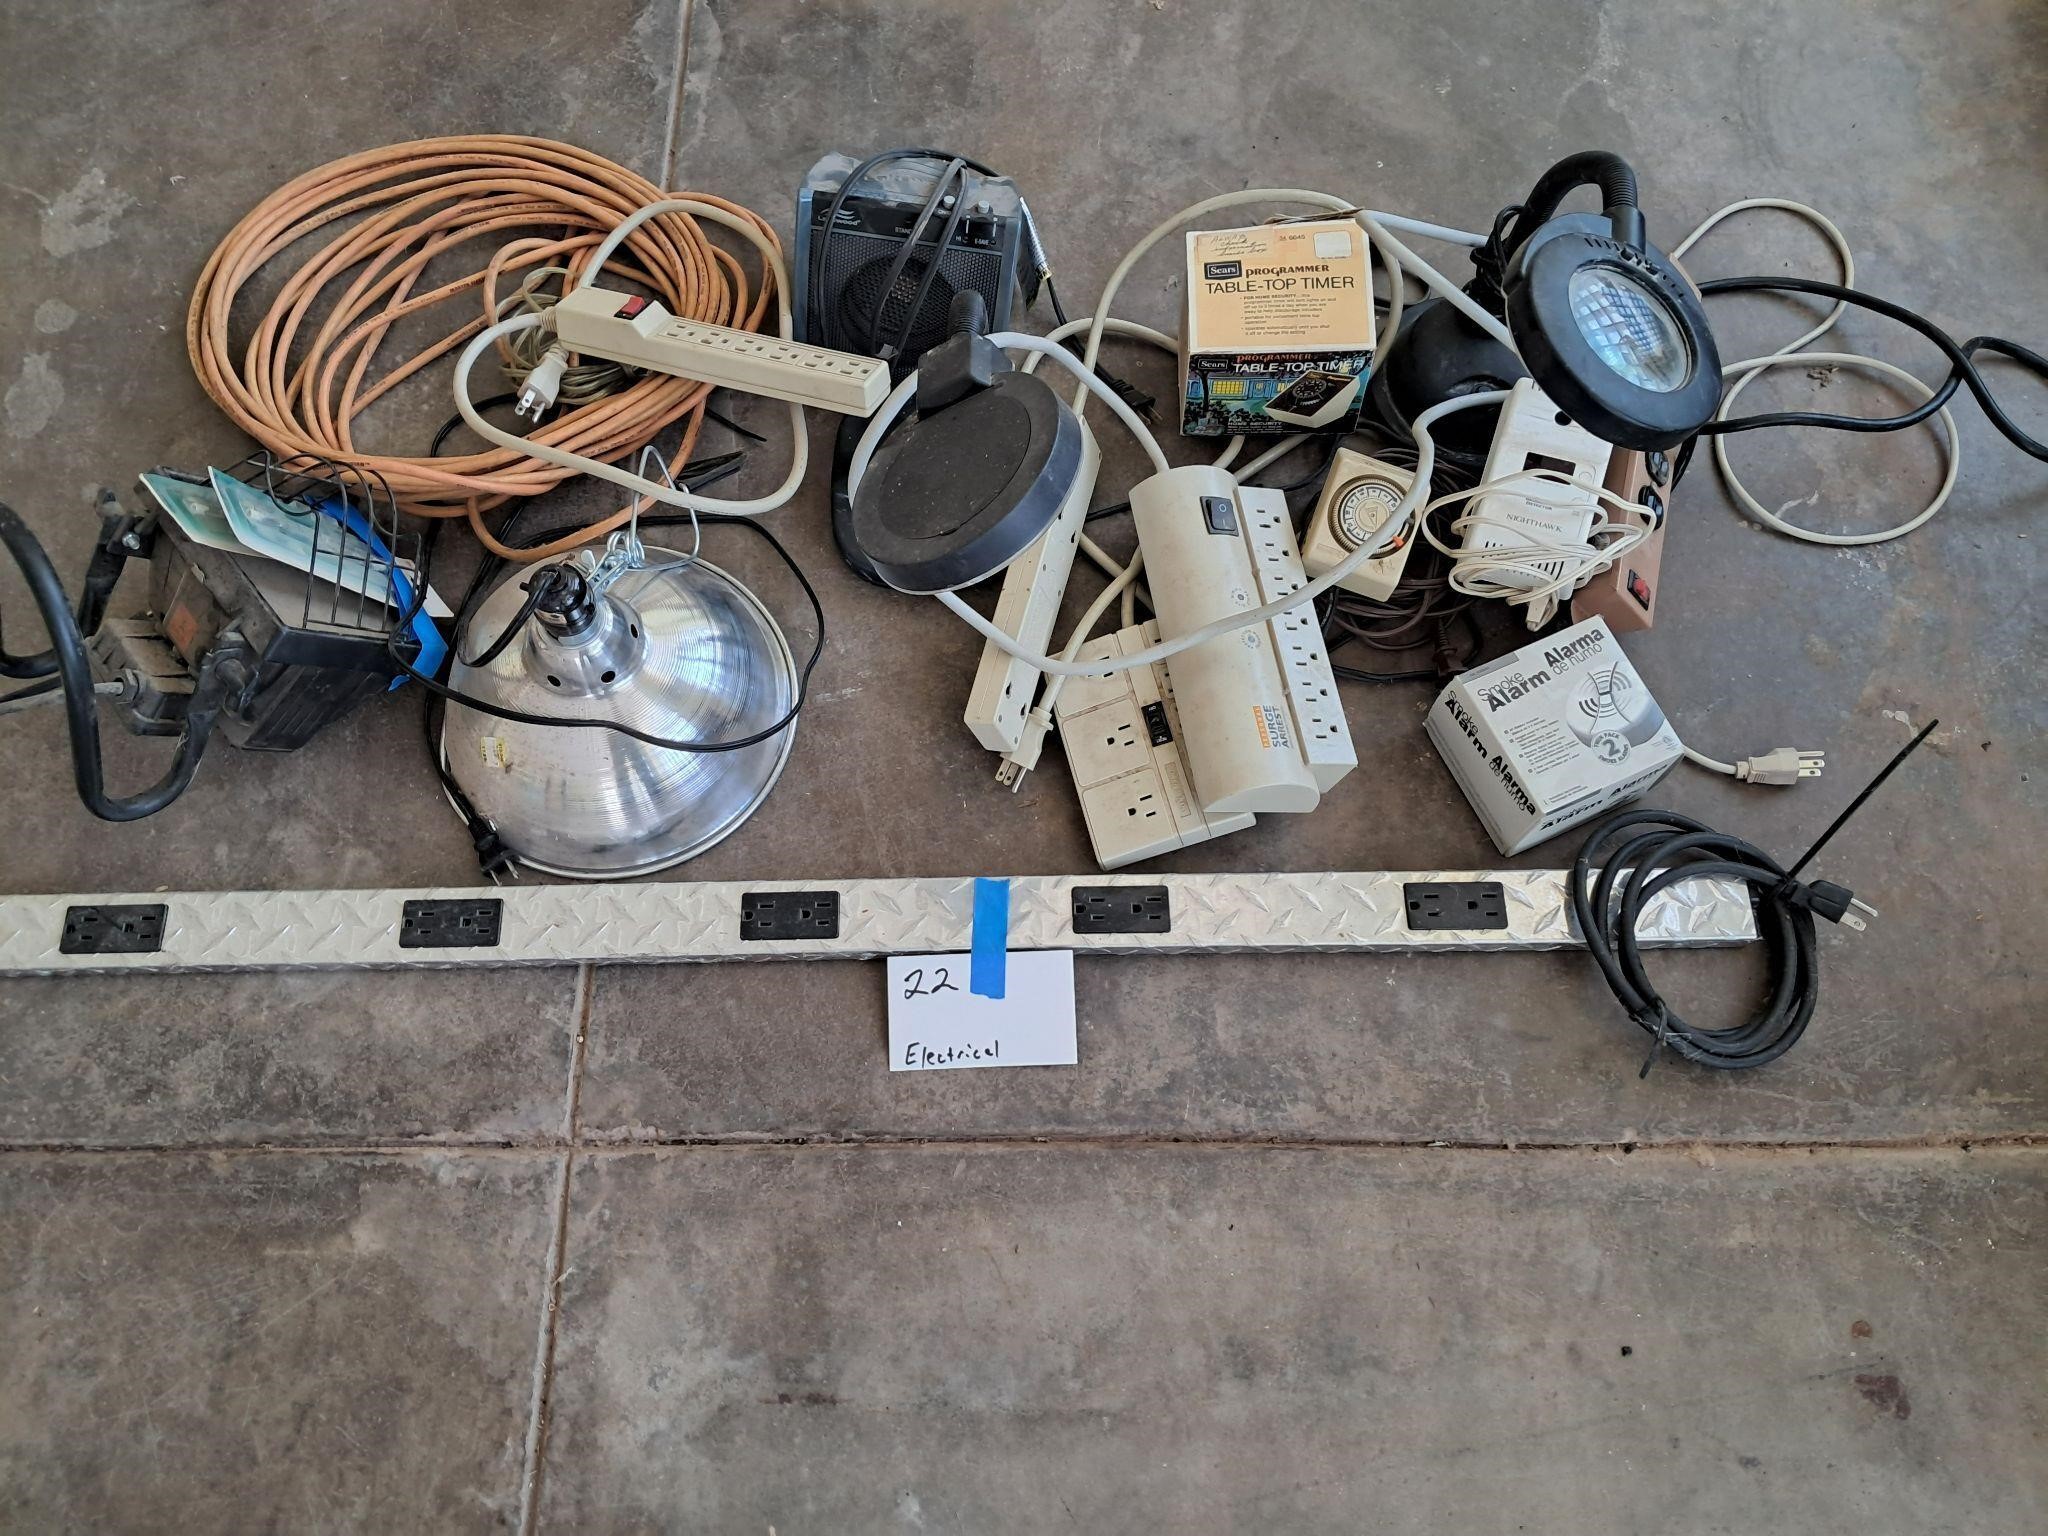 Electrical cords, surge protectors, timers, lamps,